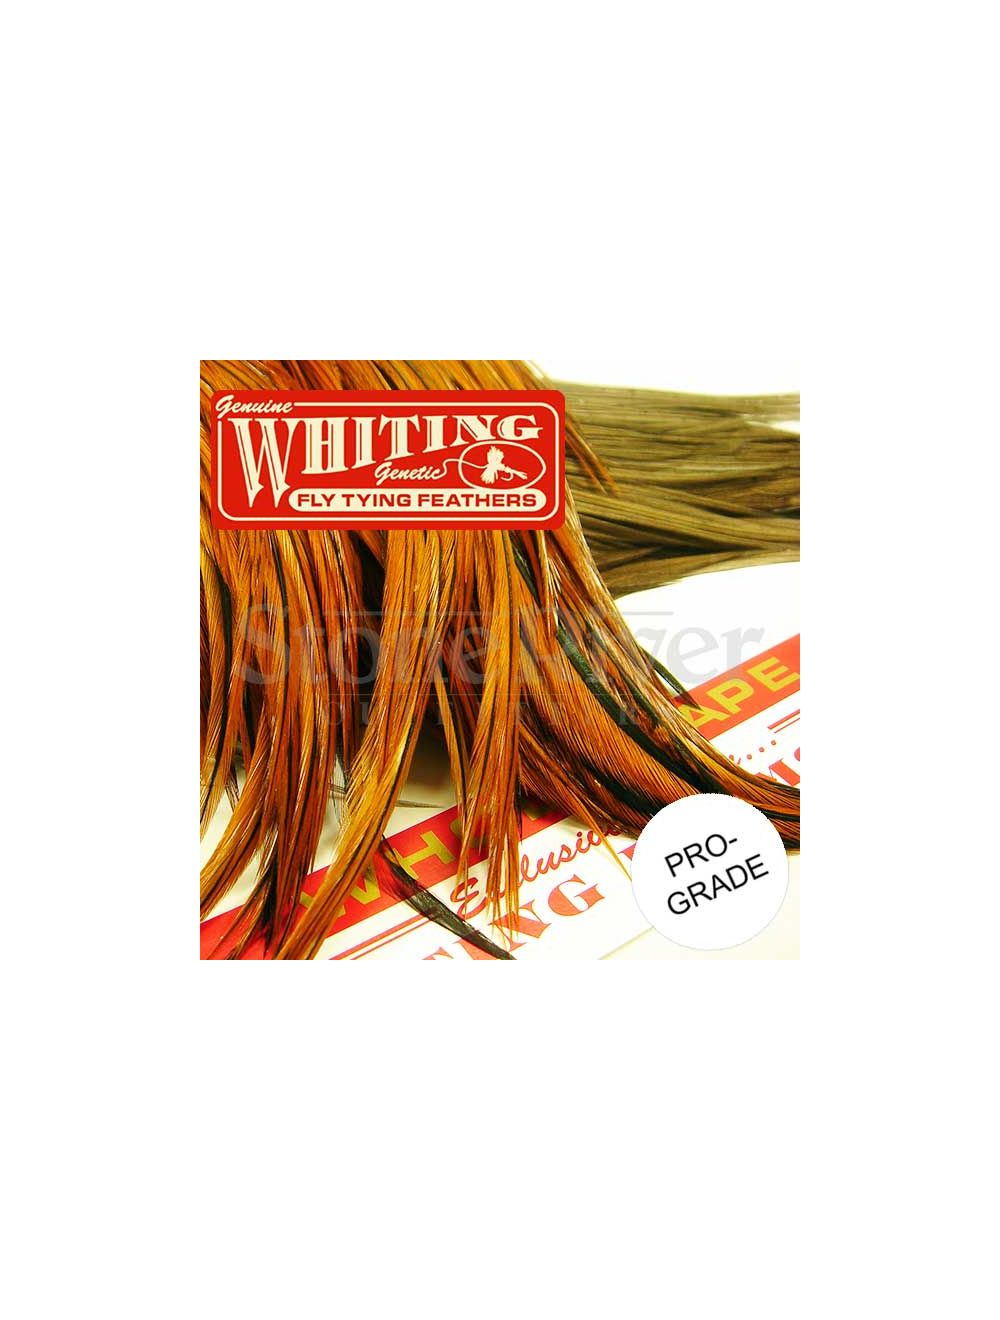 Whiting Pro Grade White Rooster Cape Neck Fly Tying for sale online